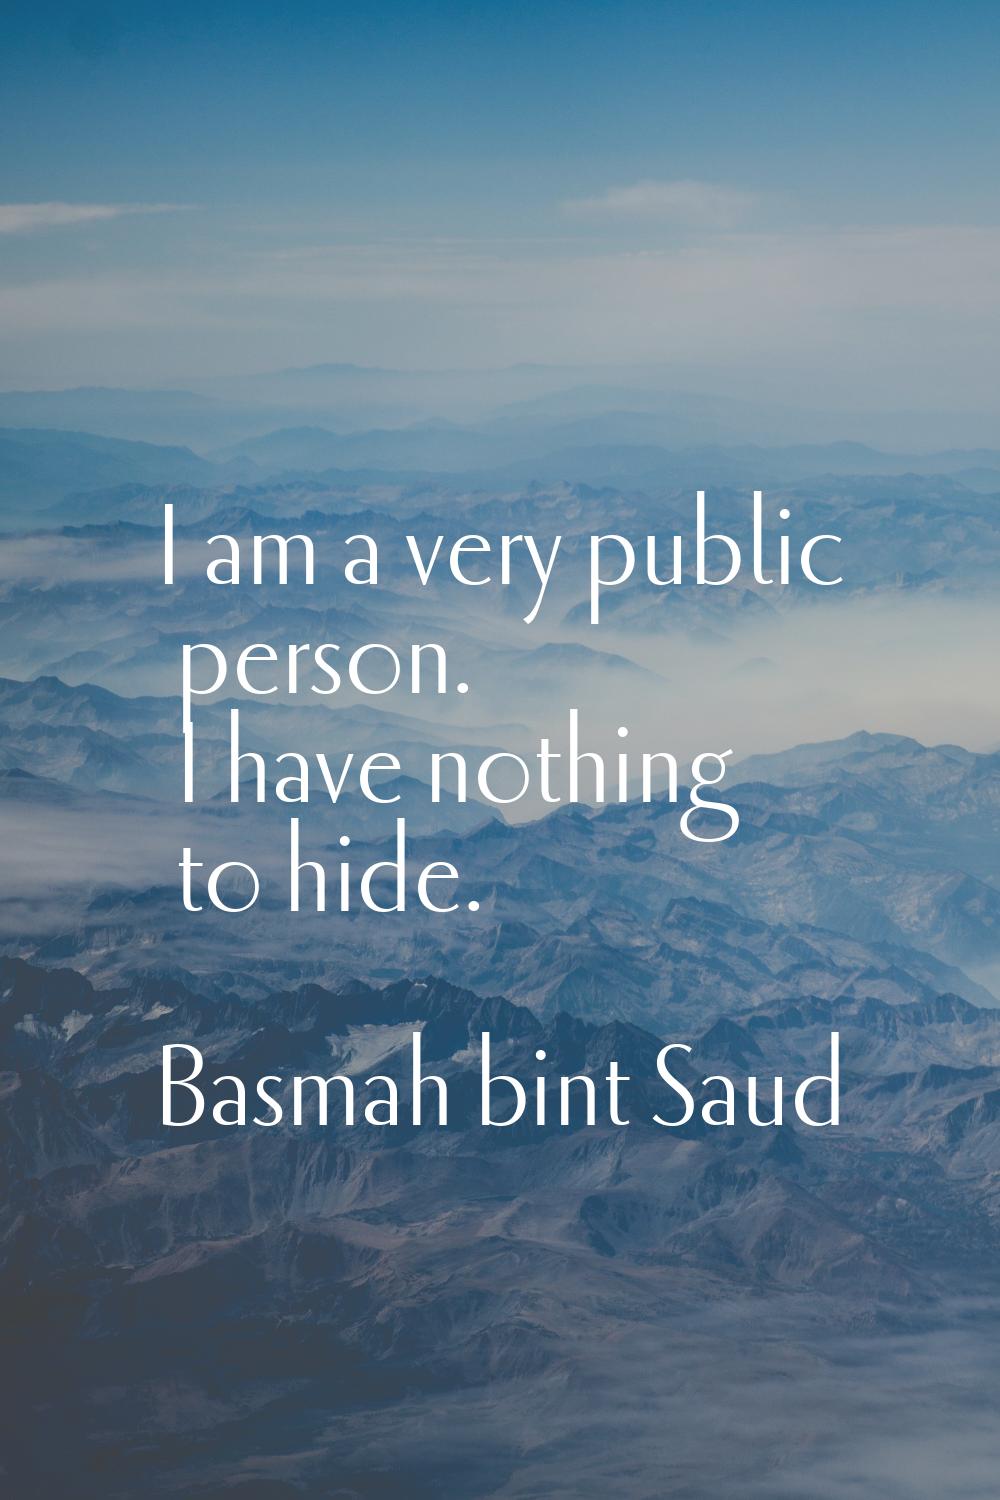 I am a very public person. I have nothing to hide.